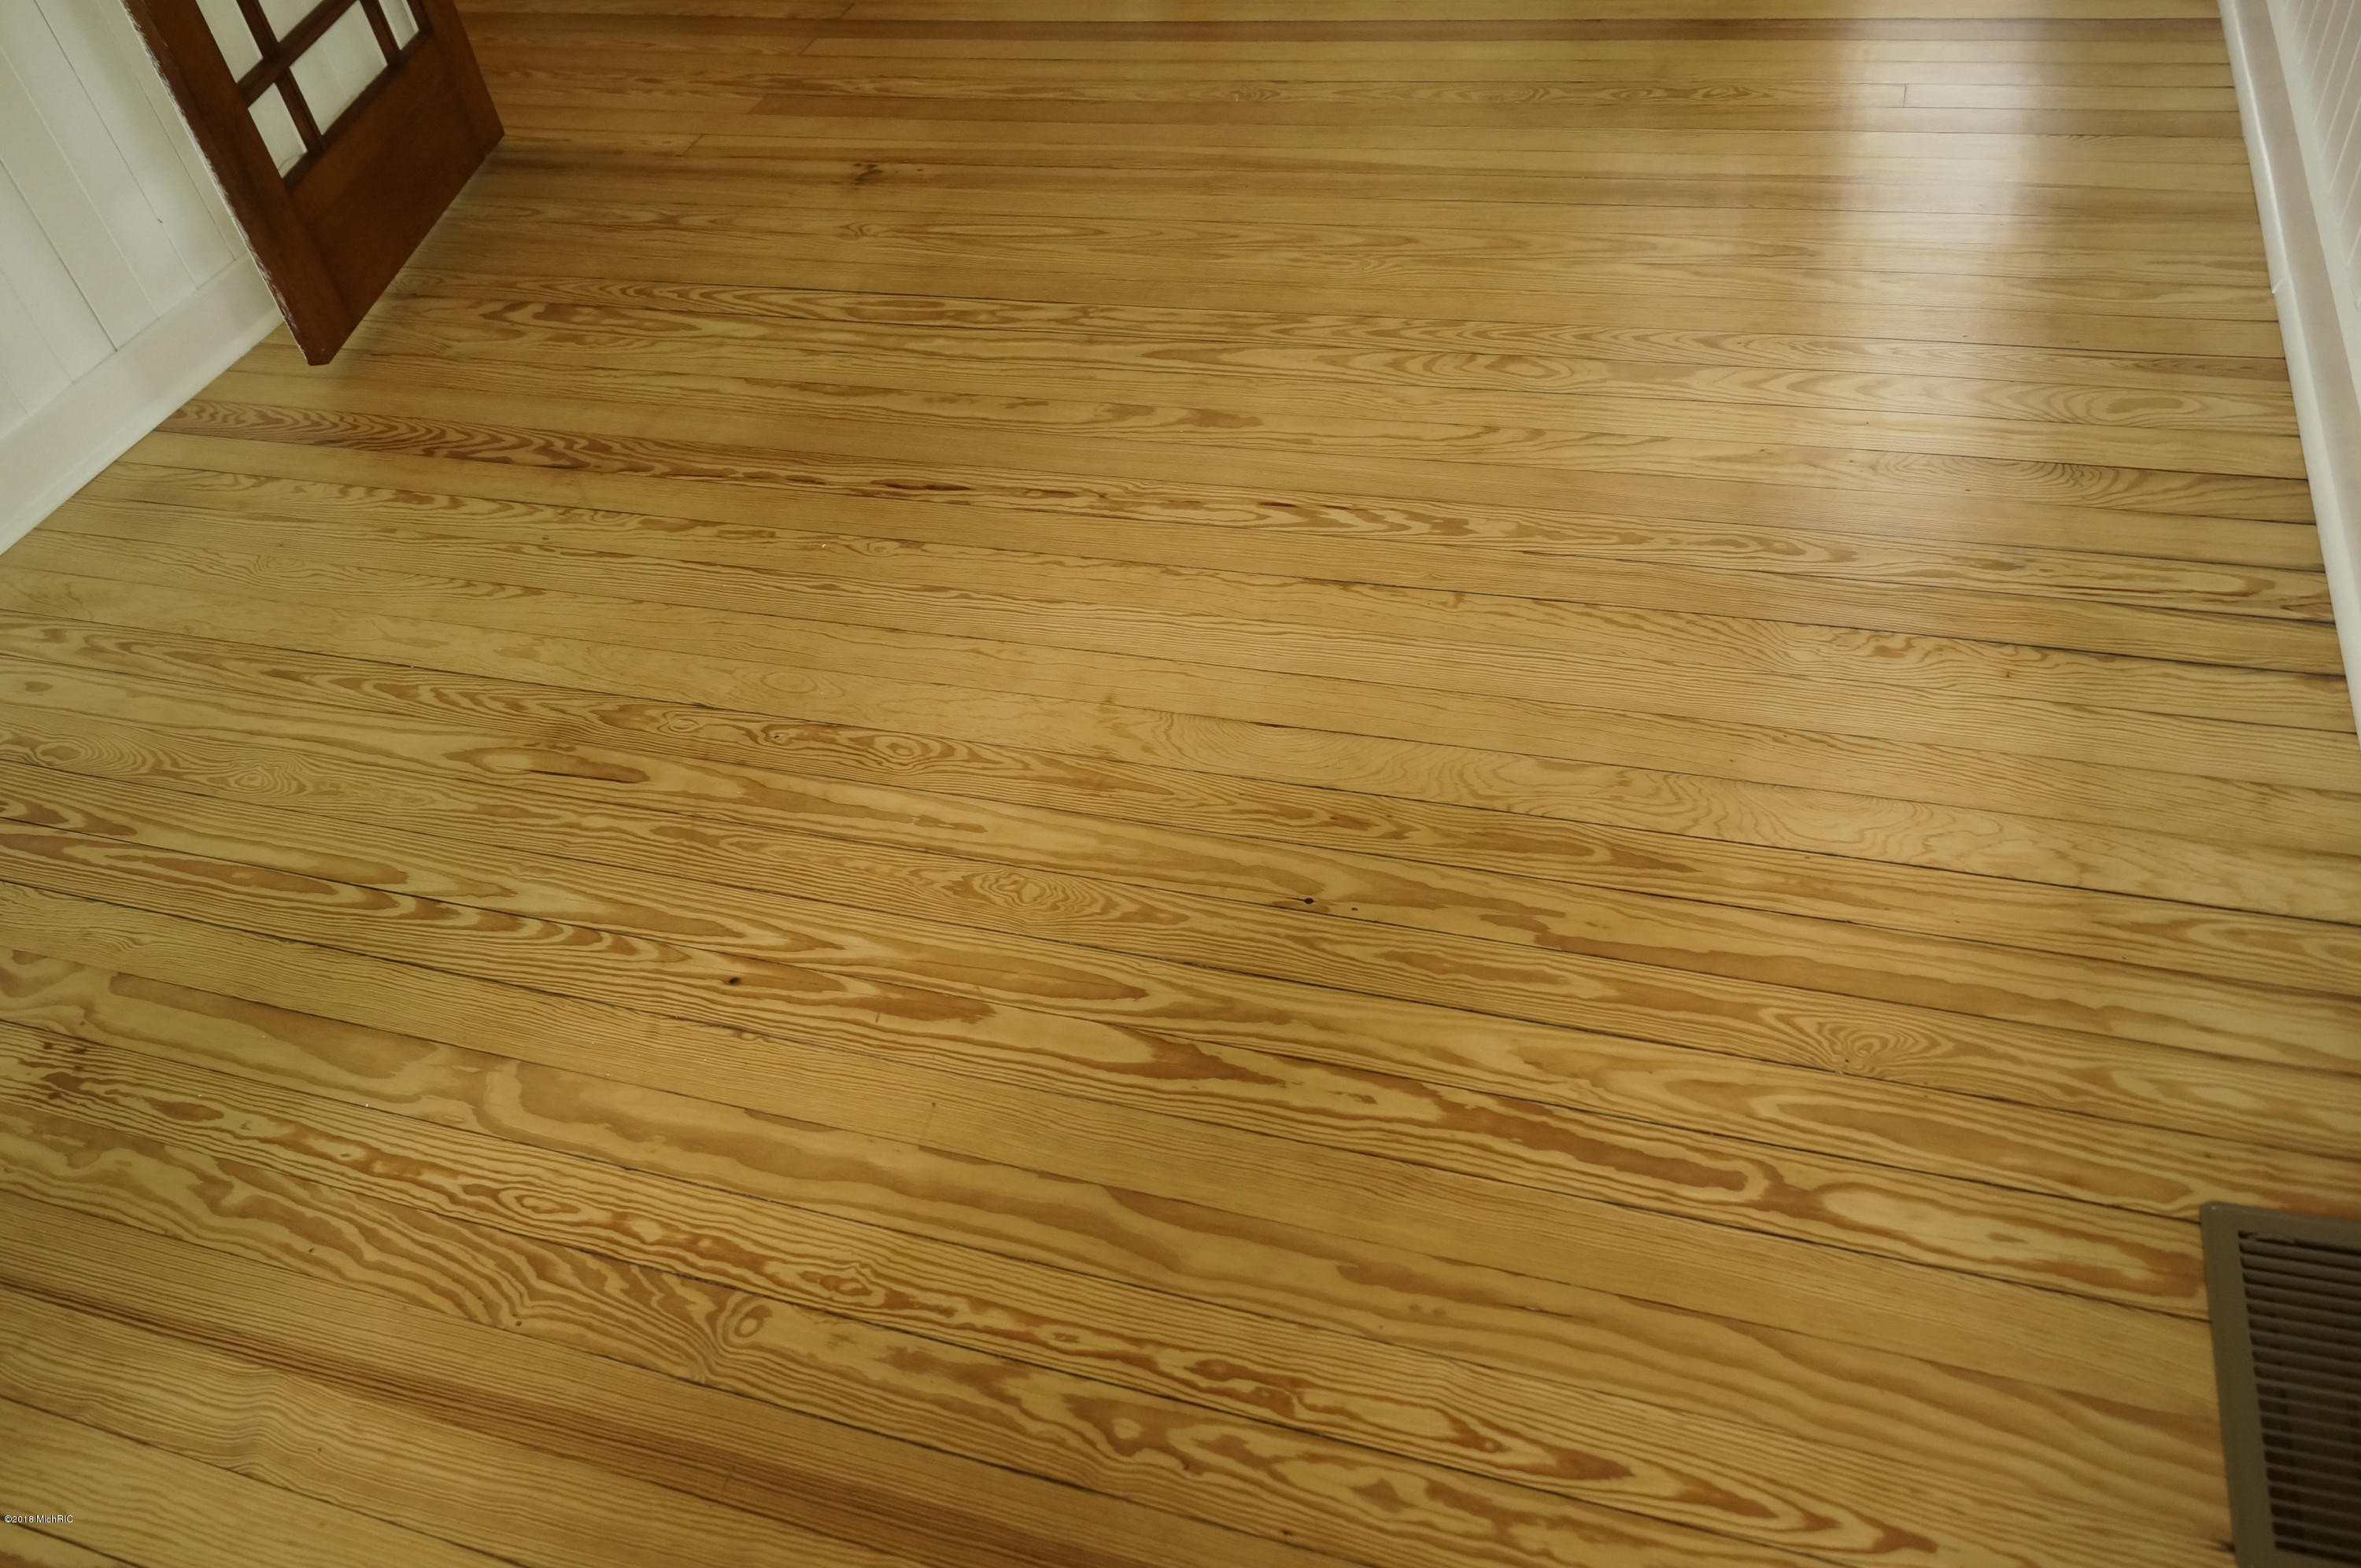 17 Awesome Hardwood Floor Refinishing Michigan 2024 free download hardwood floor refinishing michigan of 9313 montcalm avenue ne greenville mi 48838 log homes by the throughout property description back on market by no fault of its own buyer lost job this 